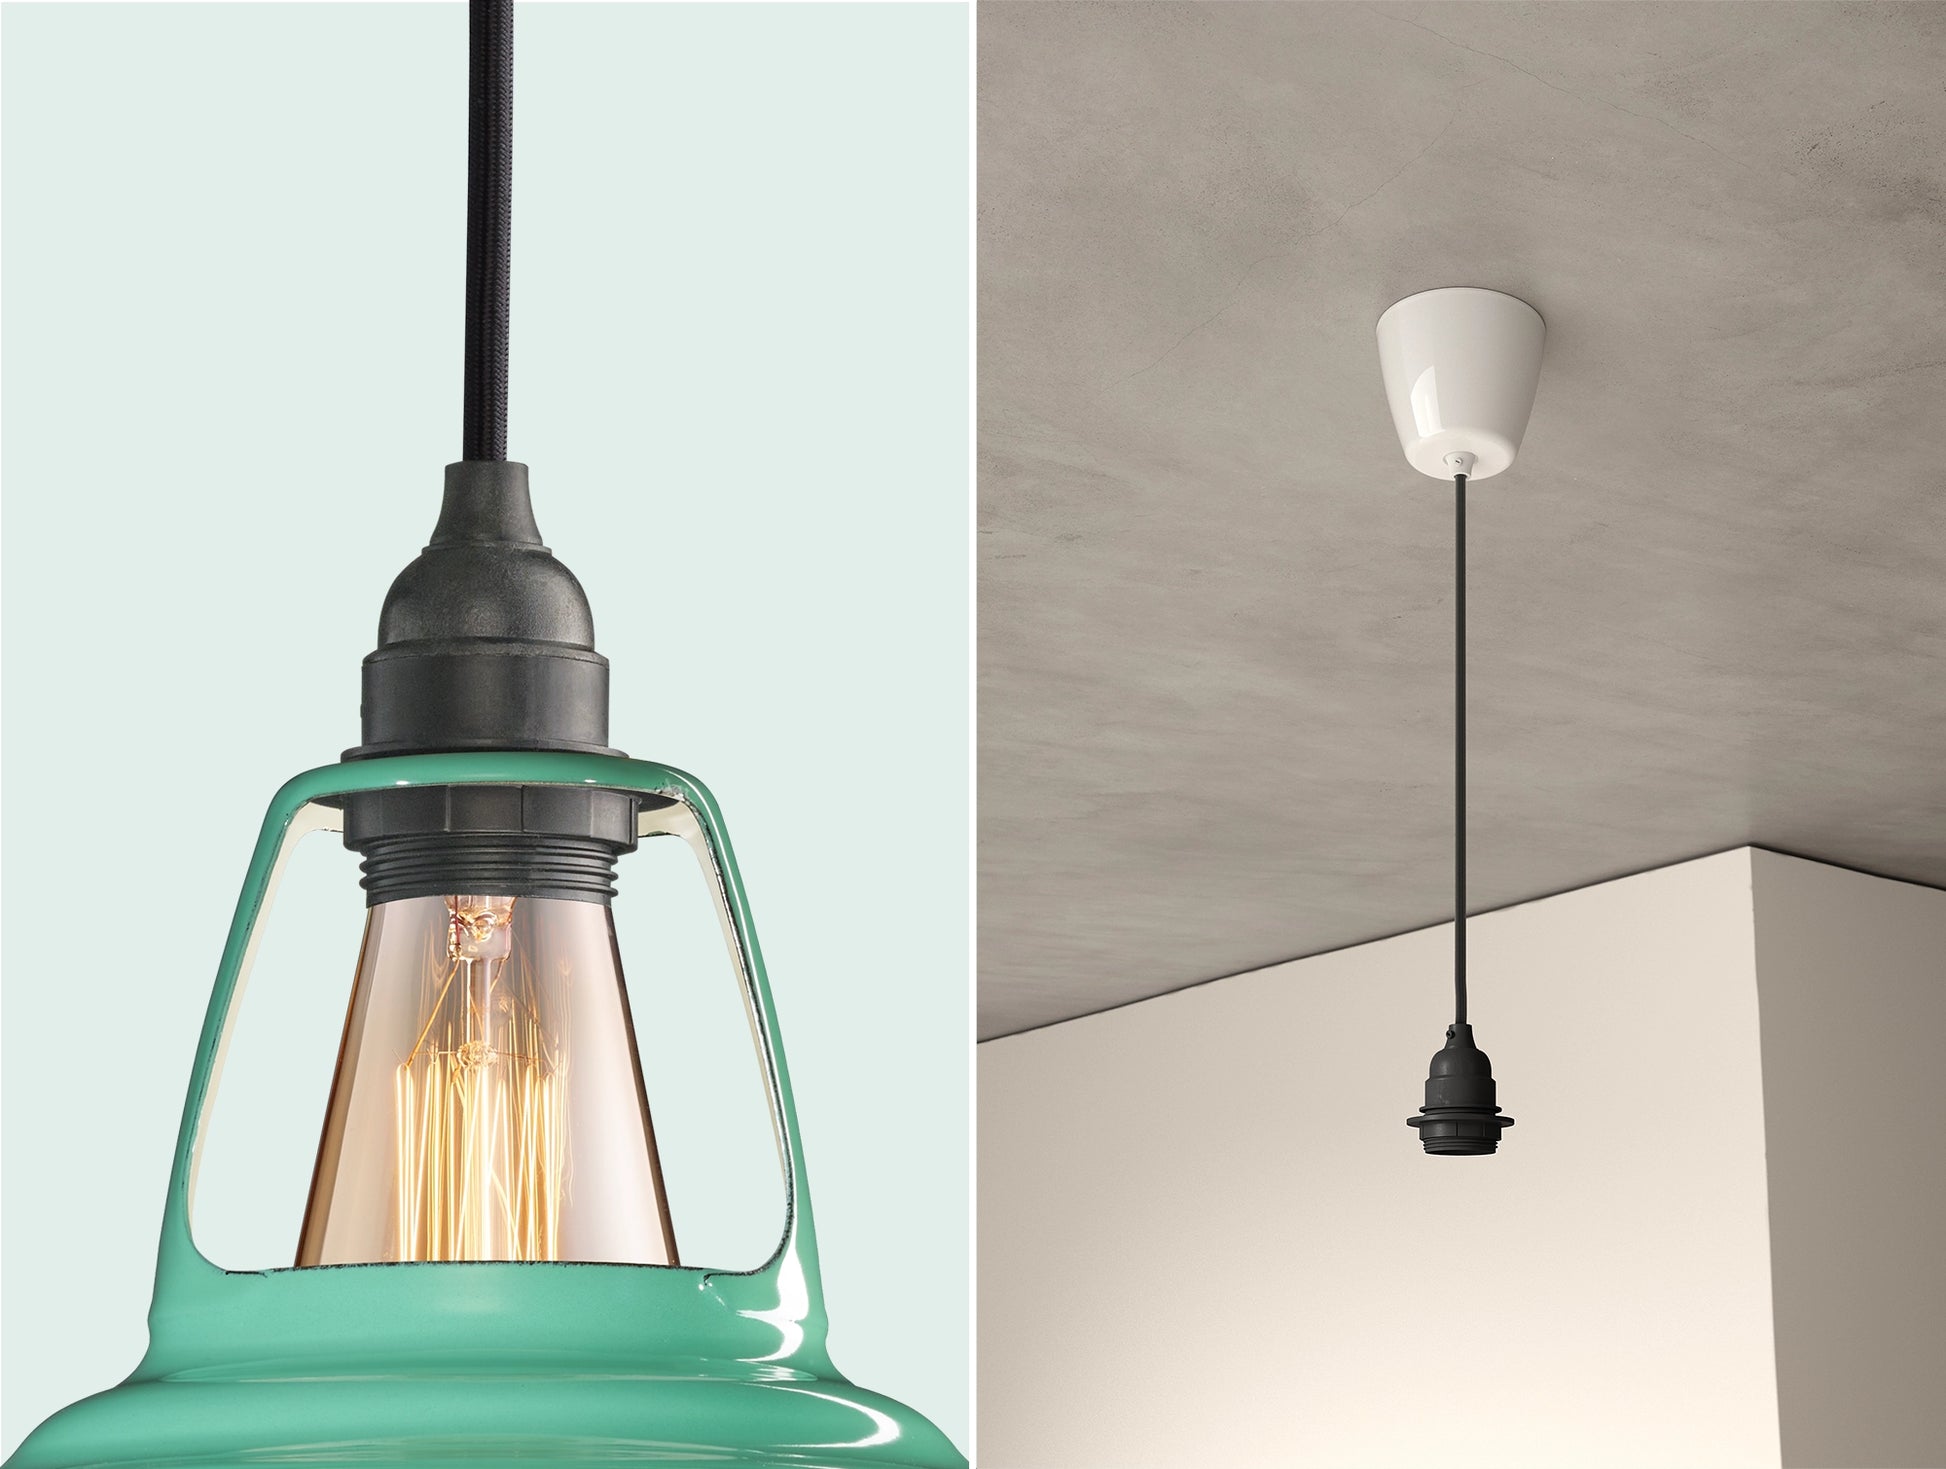 Close up of an E27 Industrial suspension set on a Fresh Teal lampshade on the left. On the right, an E27 Industrial pendant set is hanging from the ceiling